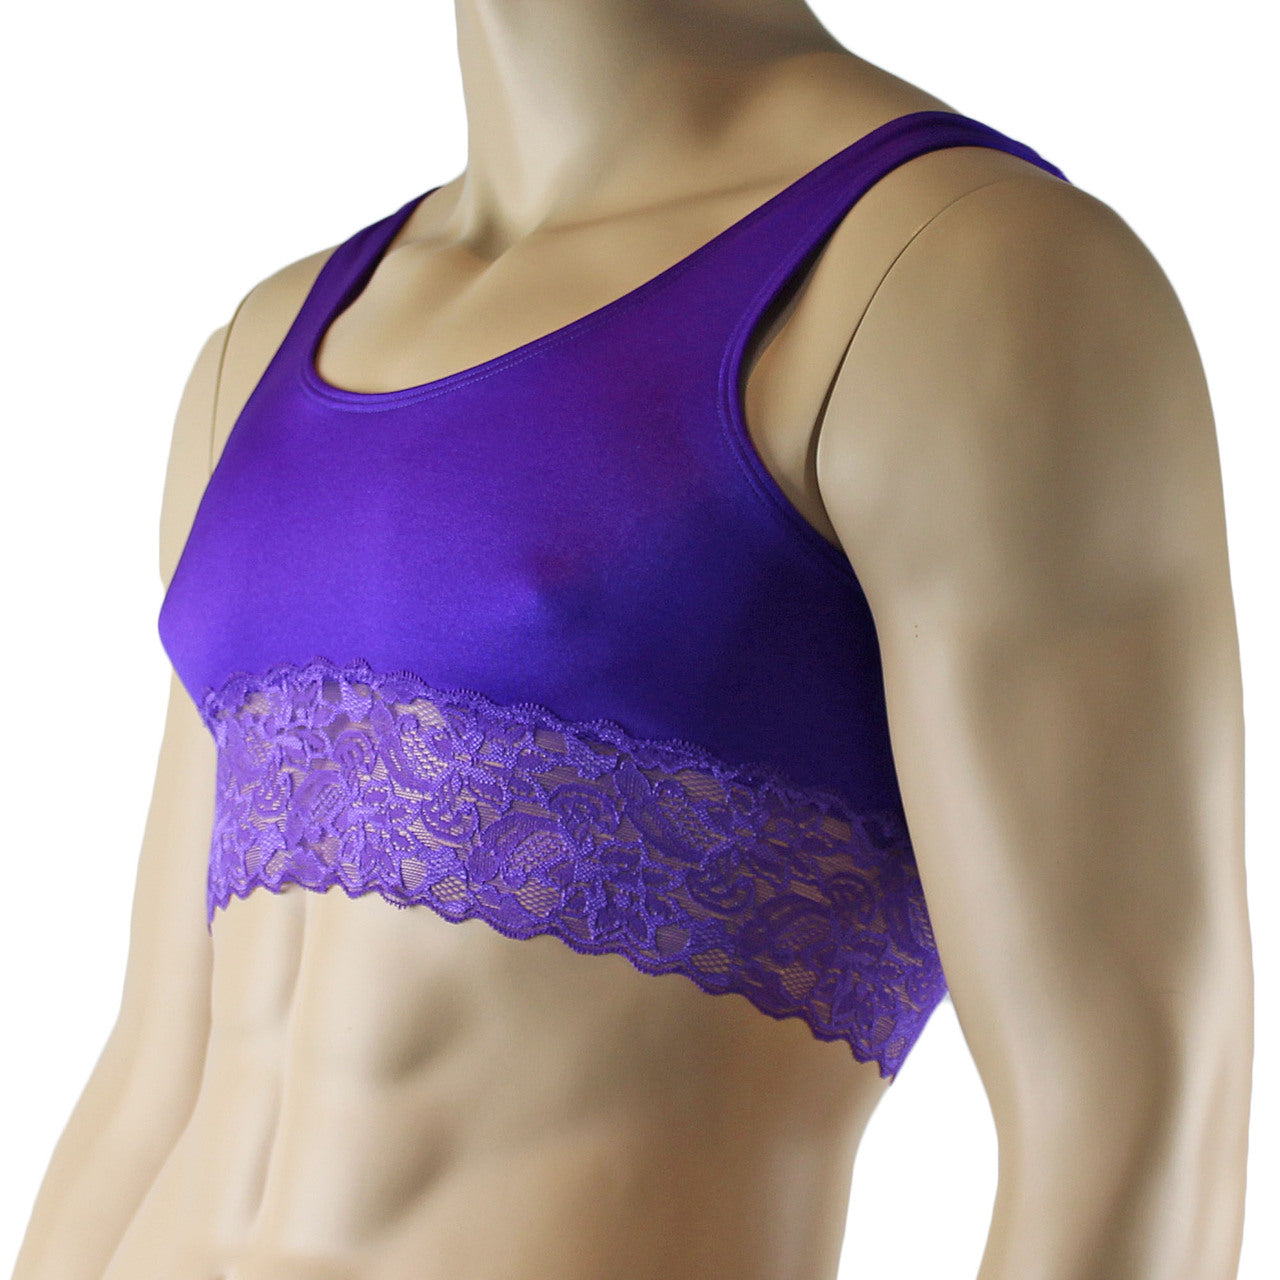 Male Lingerie Bra Camisole Top with Lace (purple plus other colours)